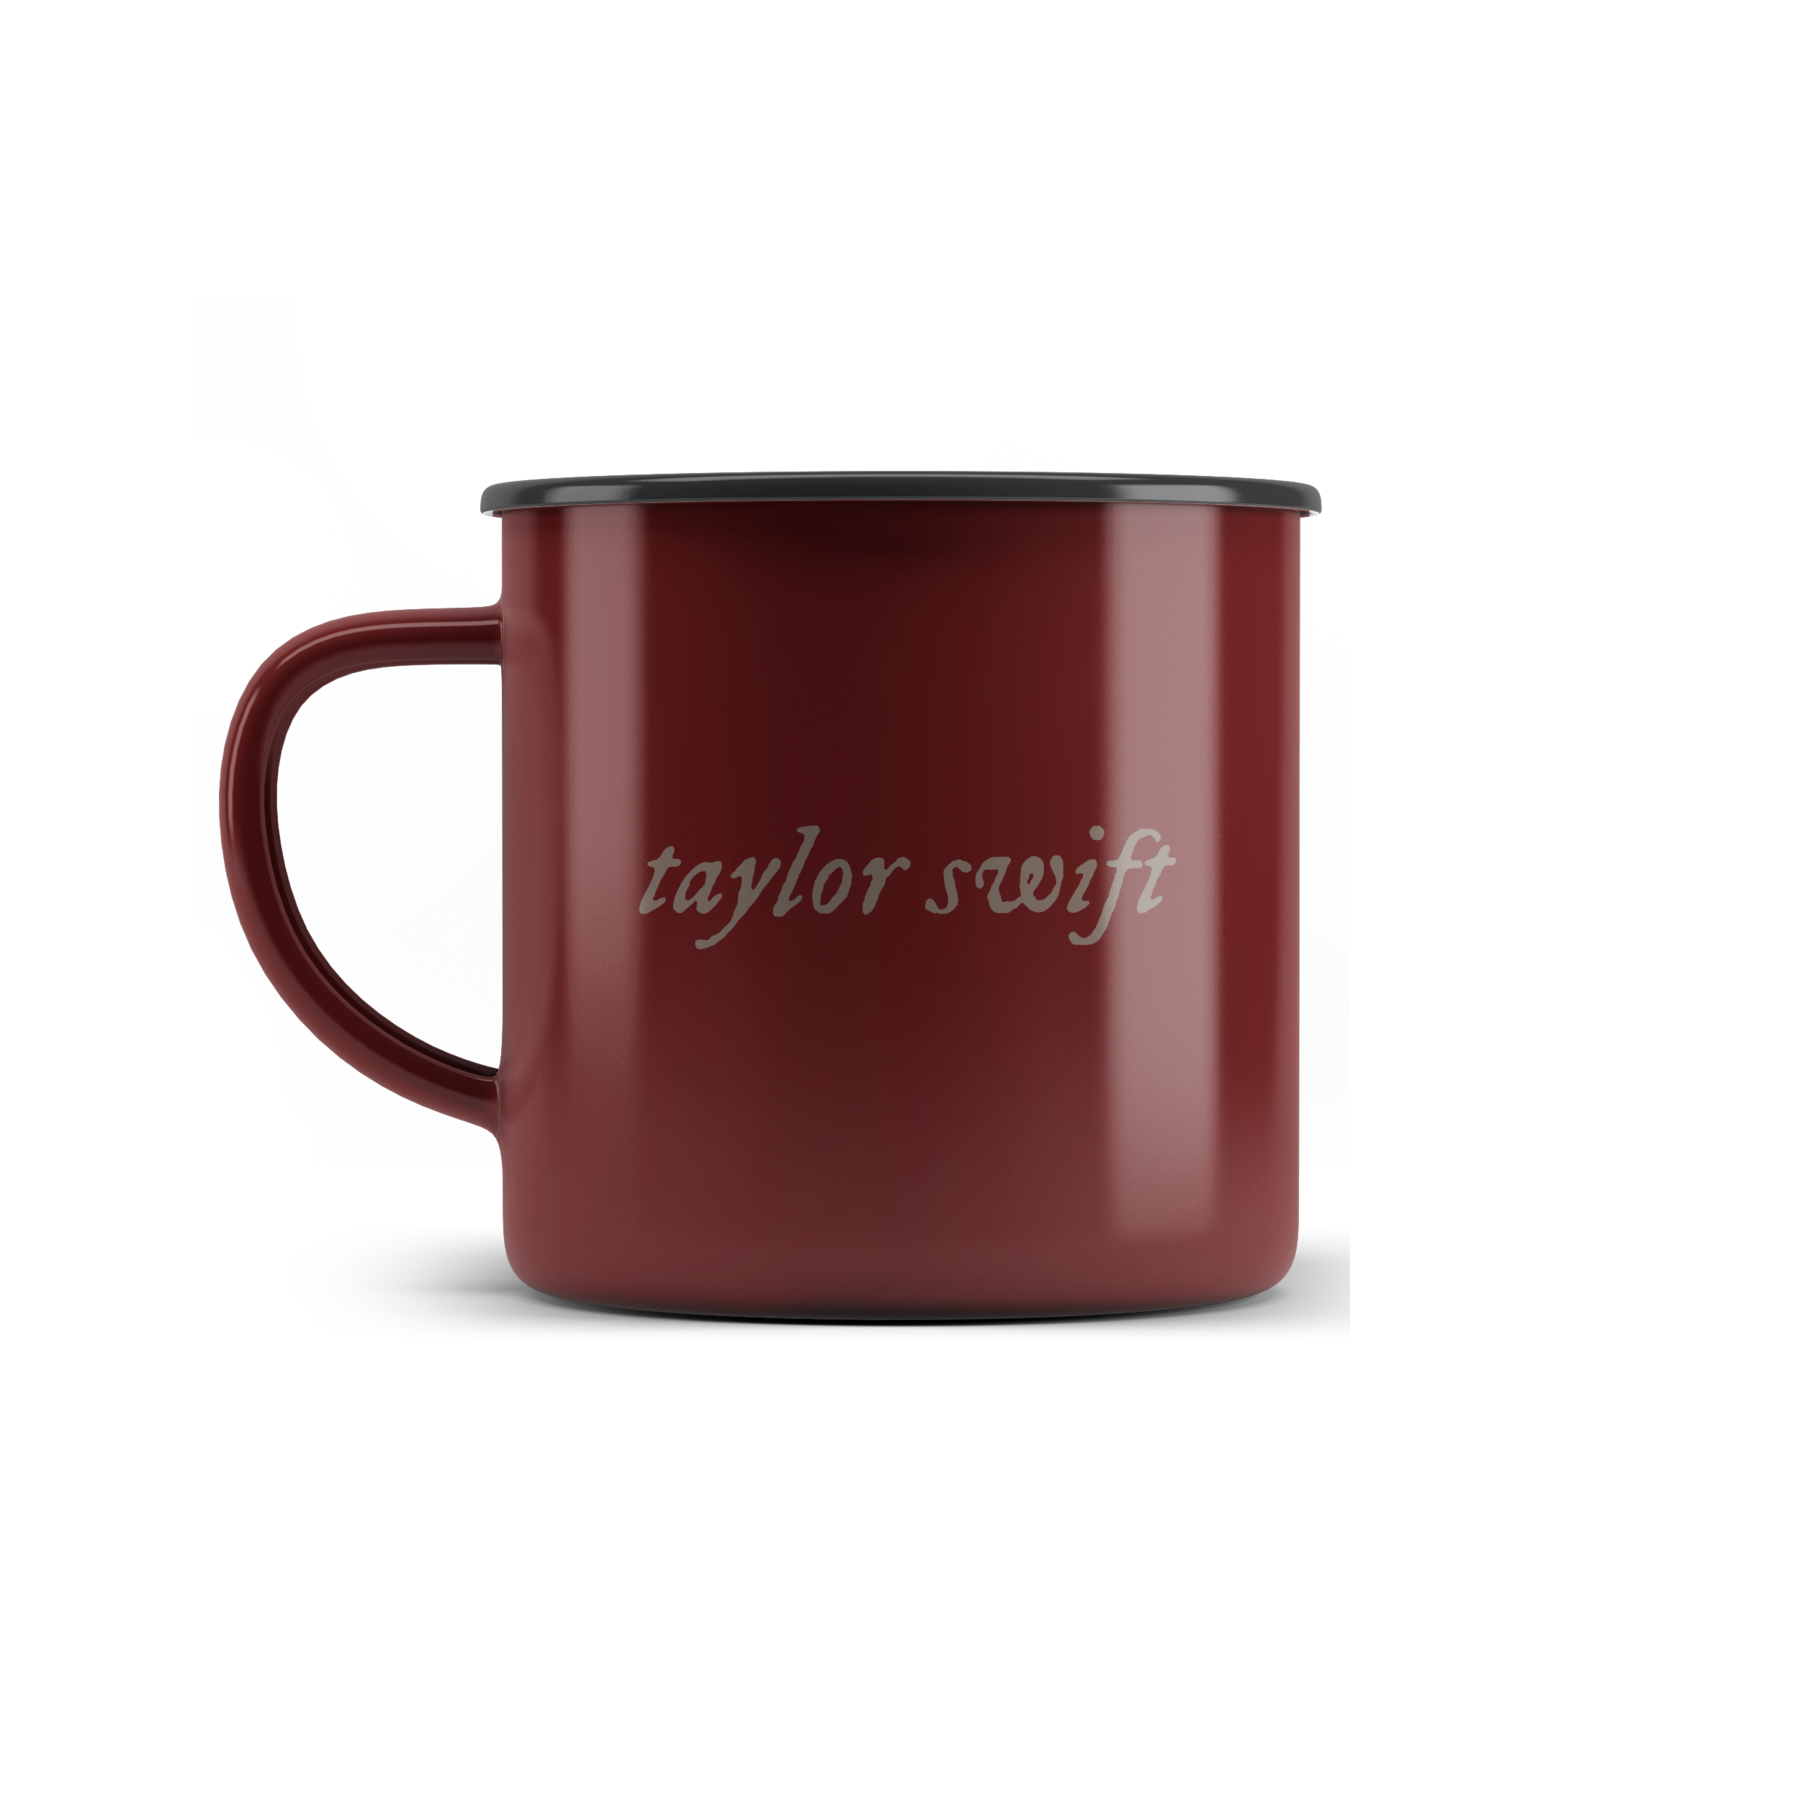 https://static.wikia.nocookie.net/taylor-swift/images/f/f8/The_%22fancy_shit%22_mug2.png/revision/latest?cb=20201213082546